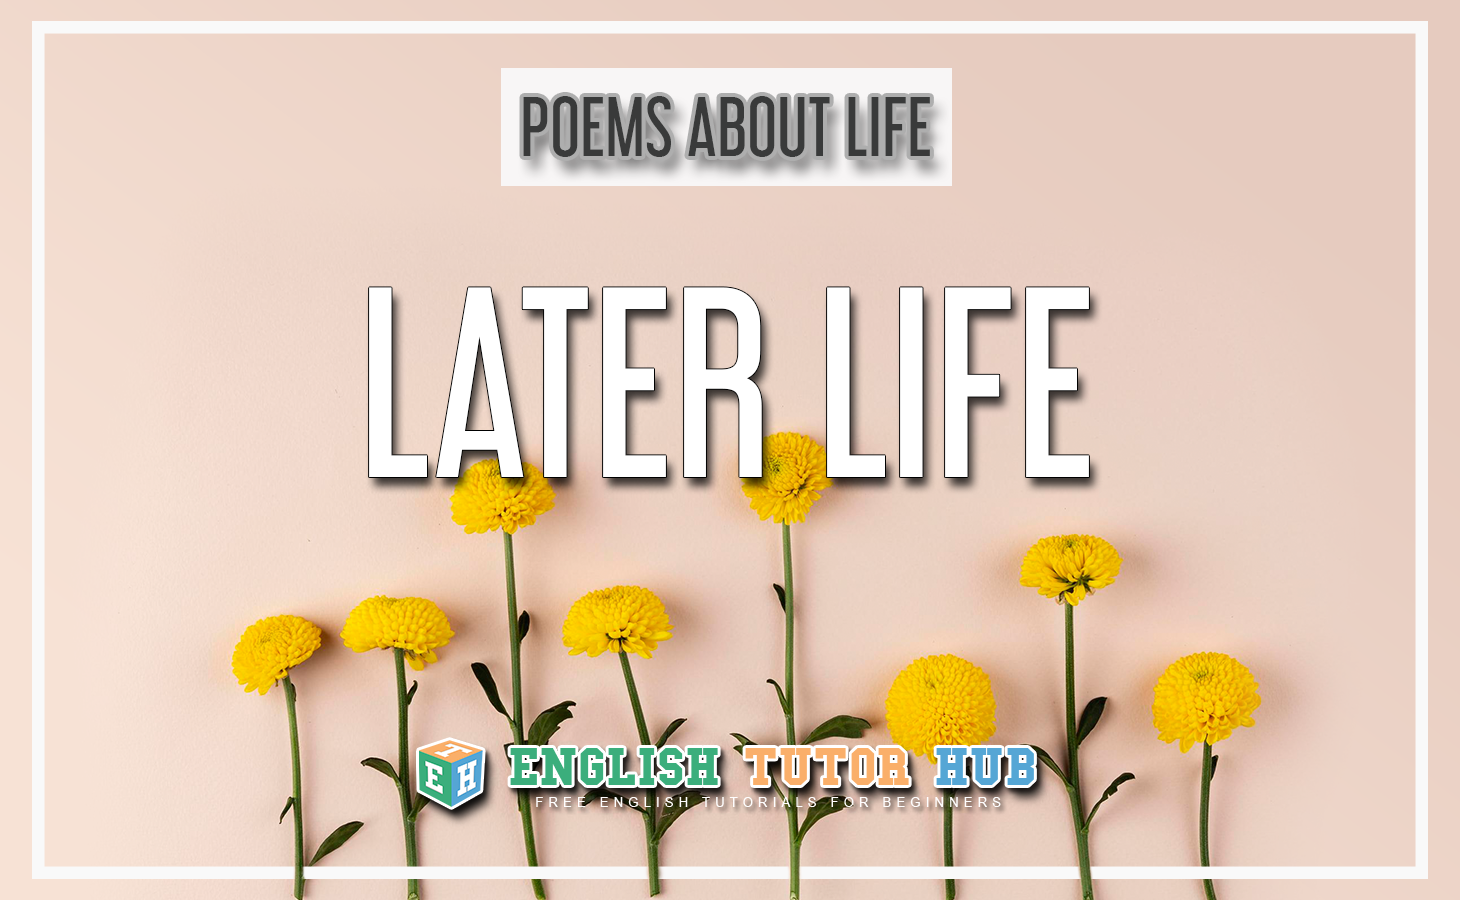 Poems About Life - Later Life